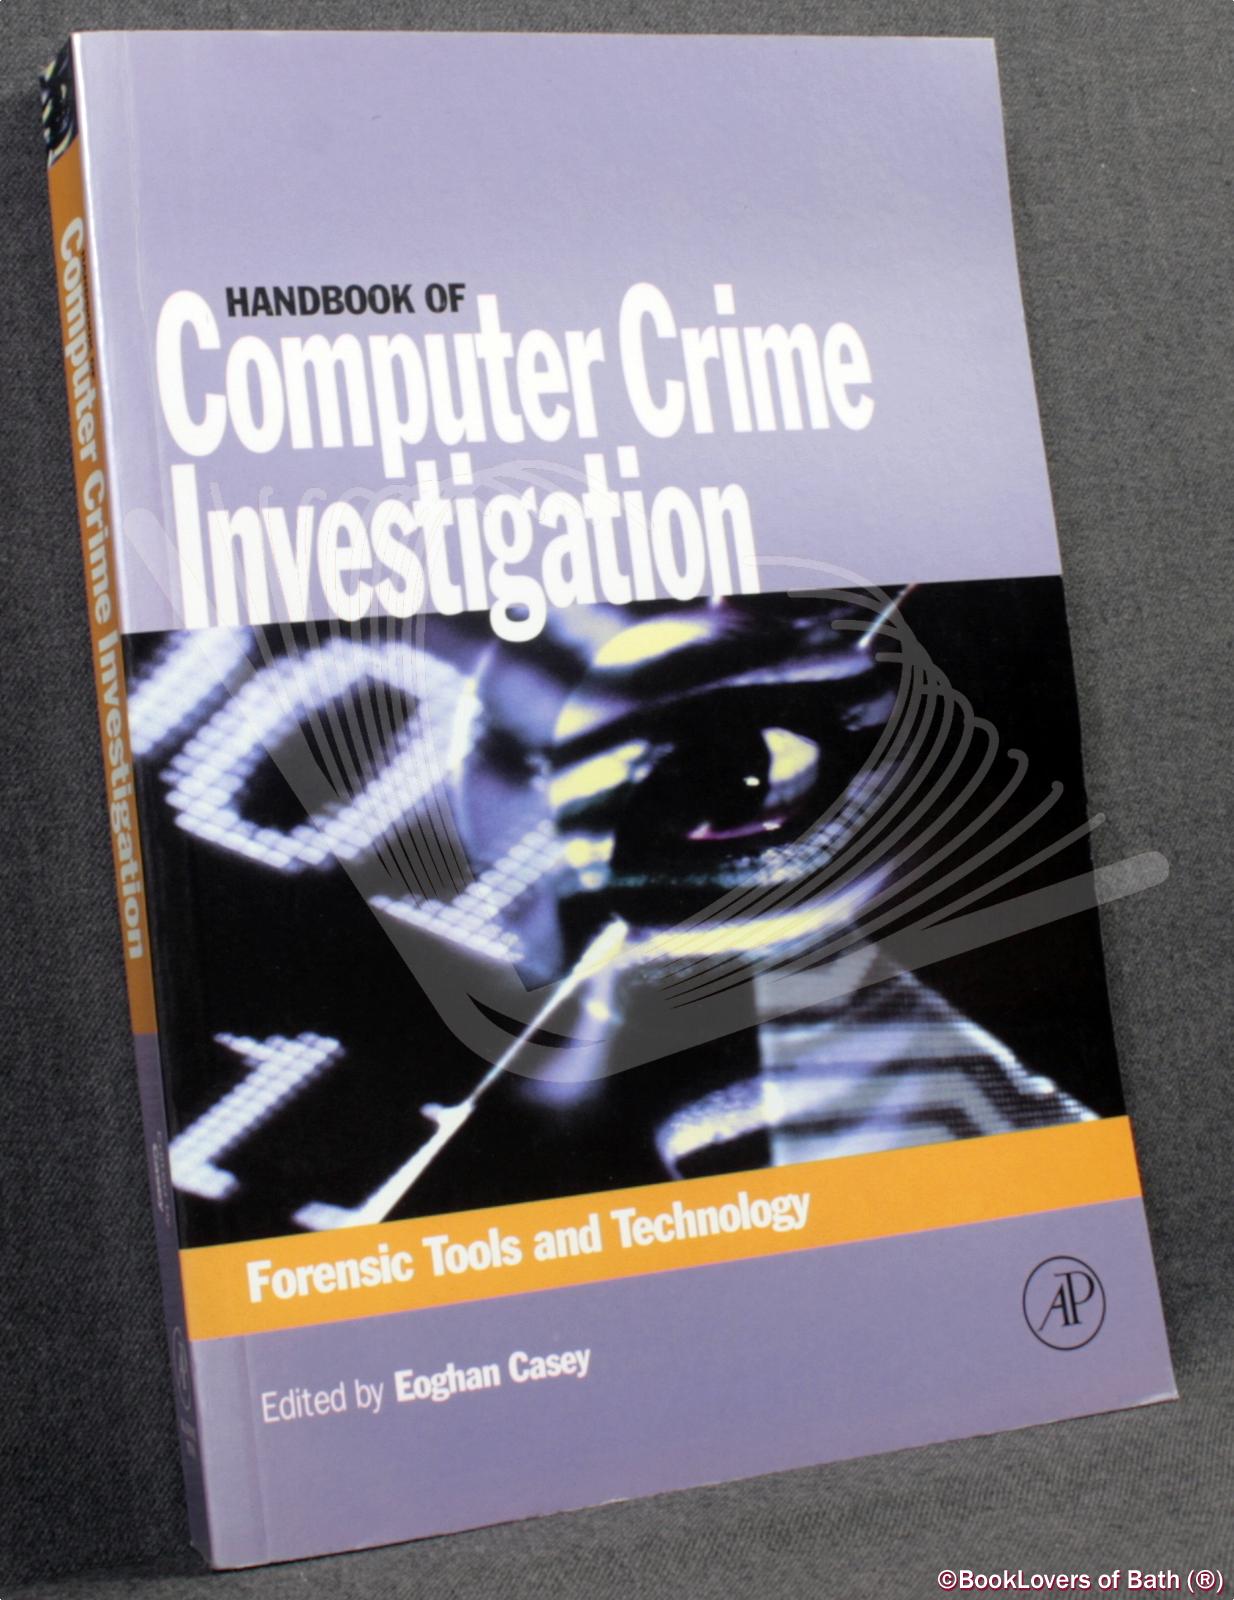 Handbook of Computer Crime Investigation: Forensic Tools and Technology - Edited by Eoghan Casey